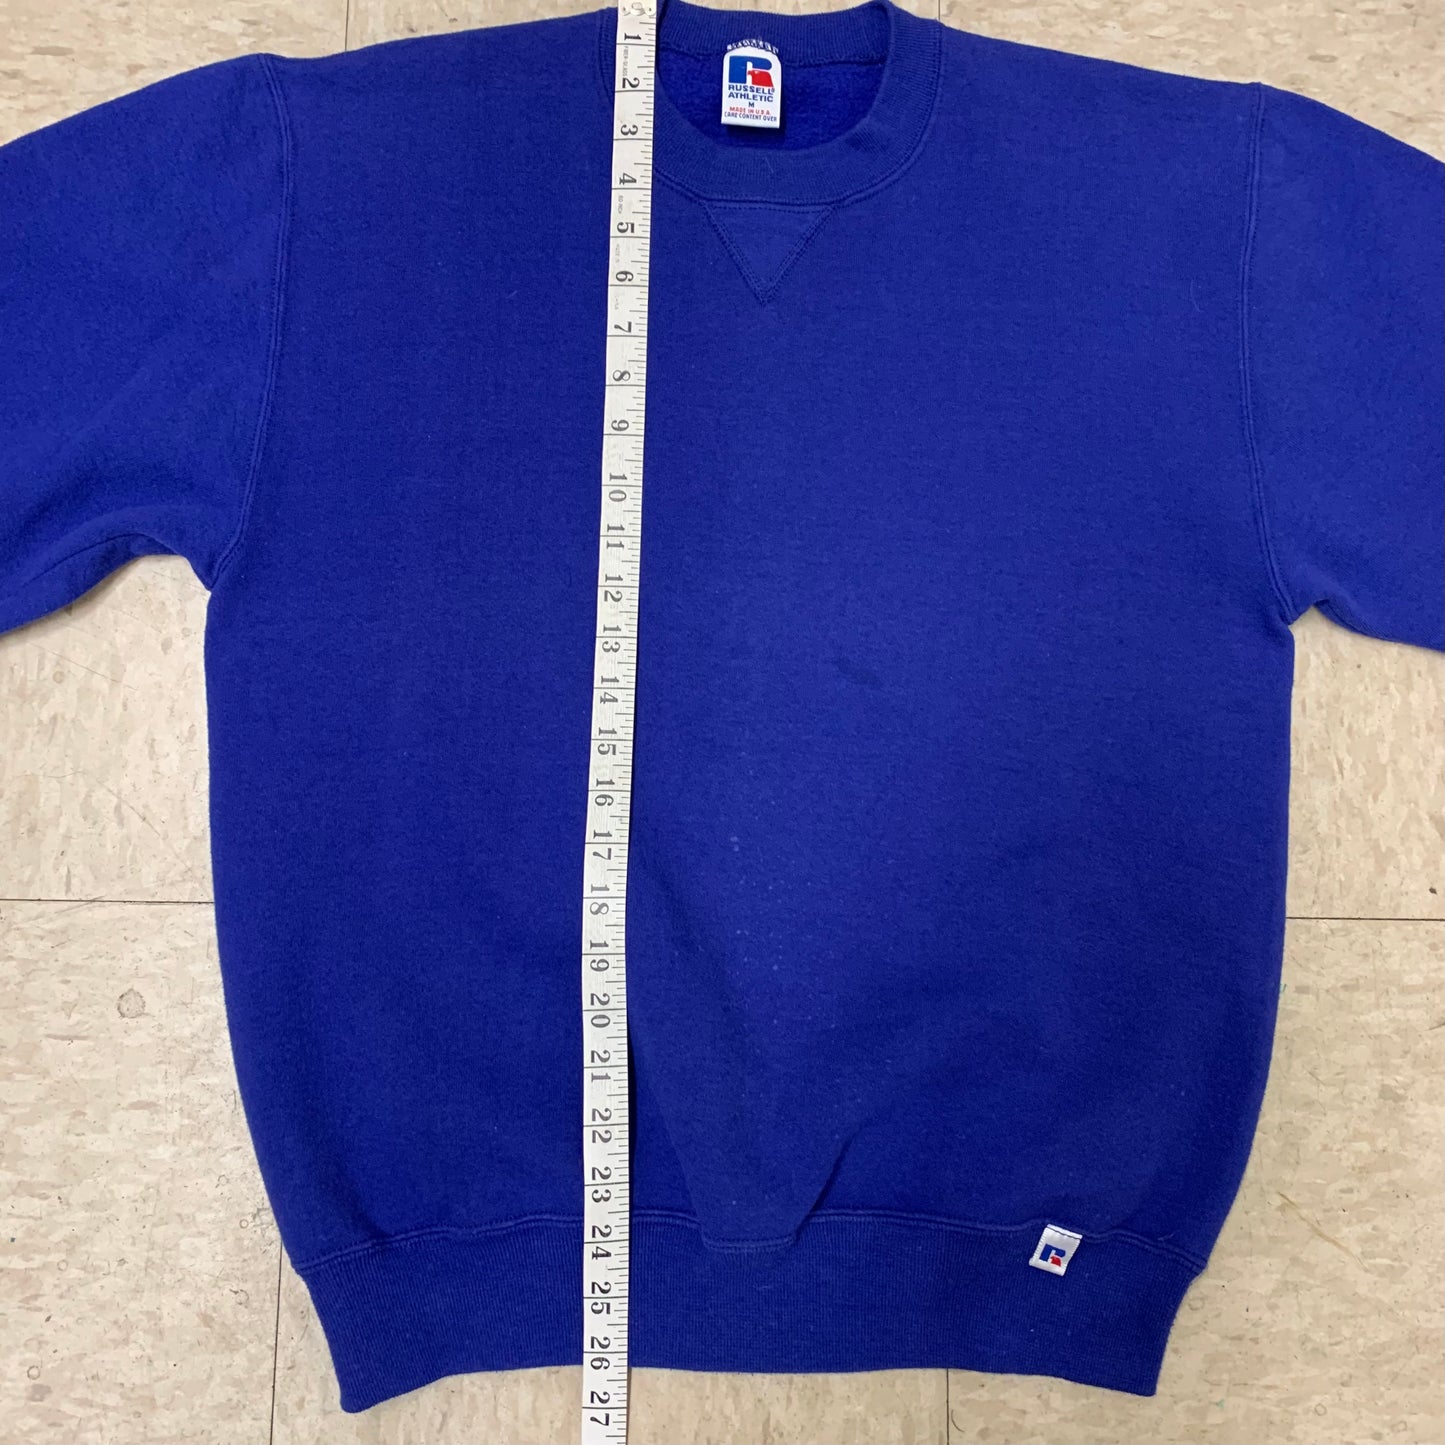 Russell Athletic Crew Royal Blue M